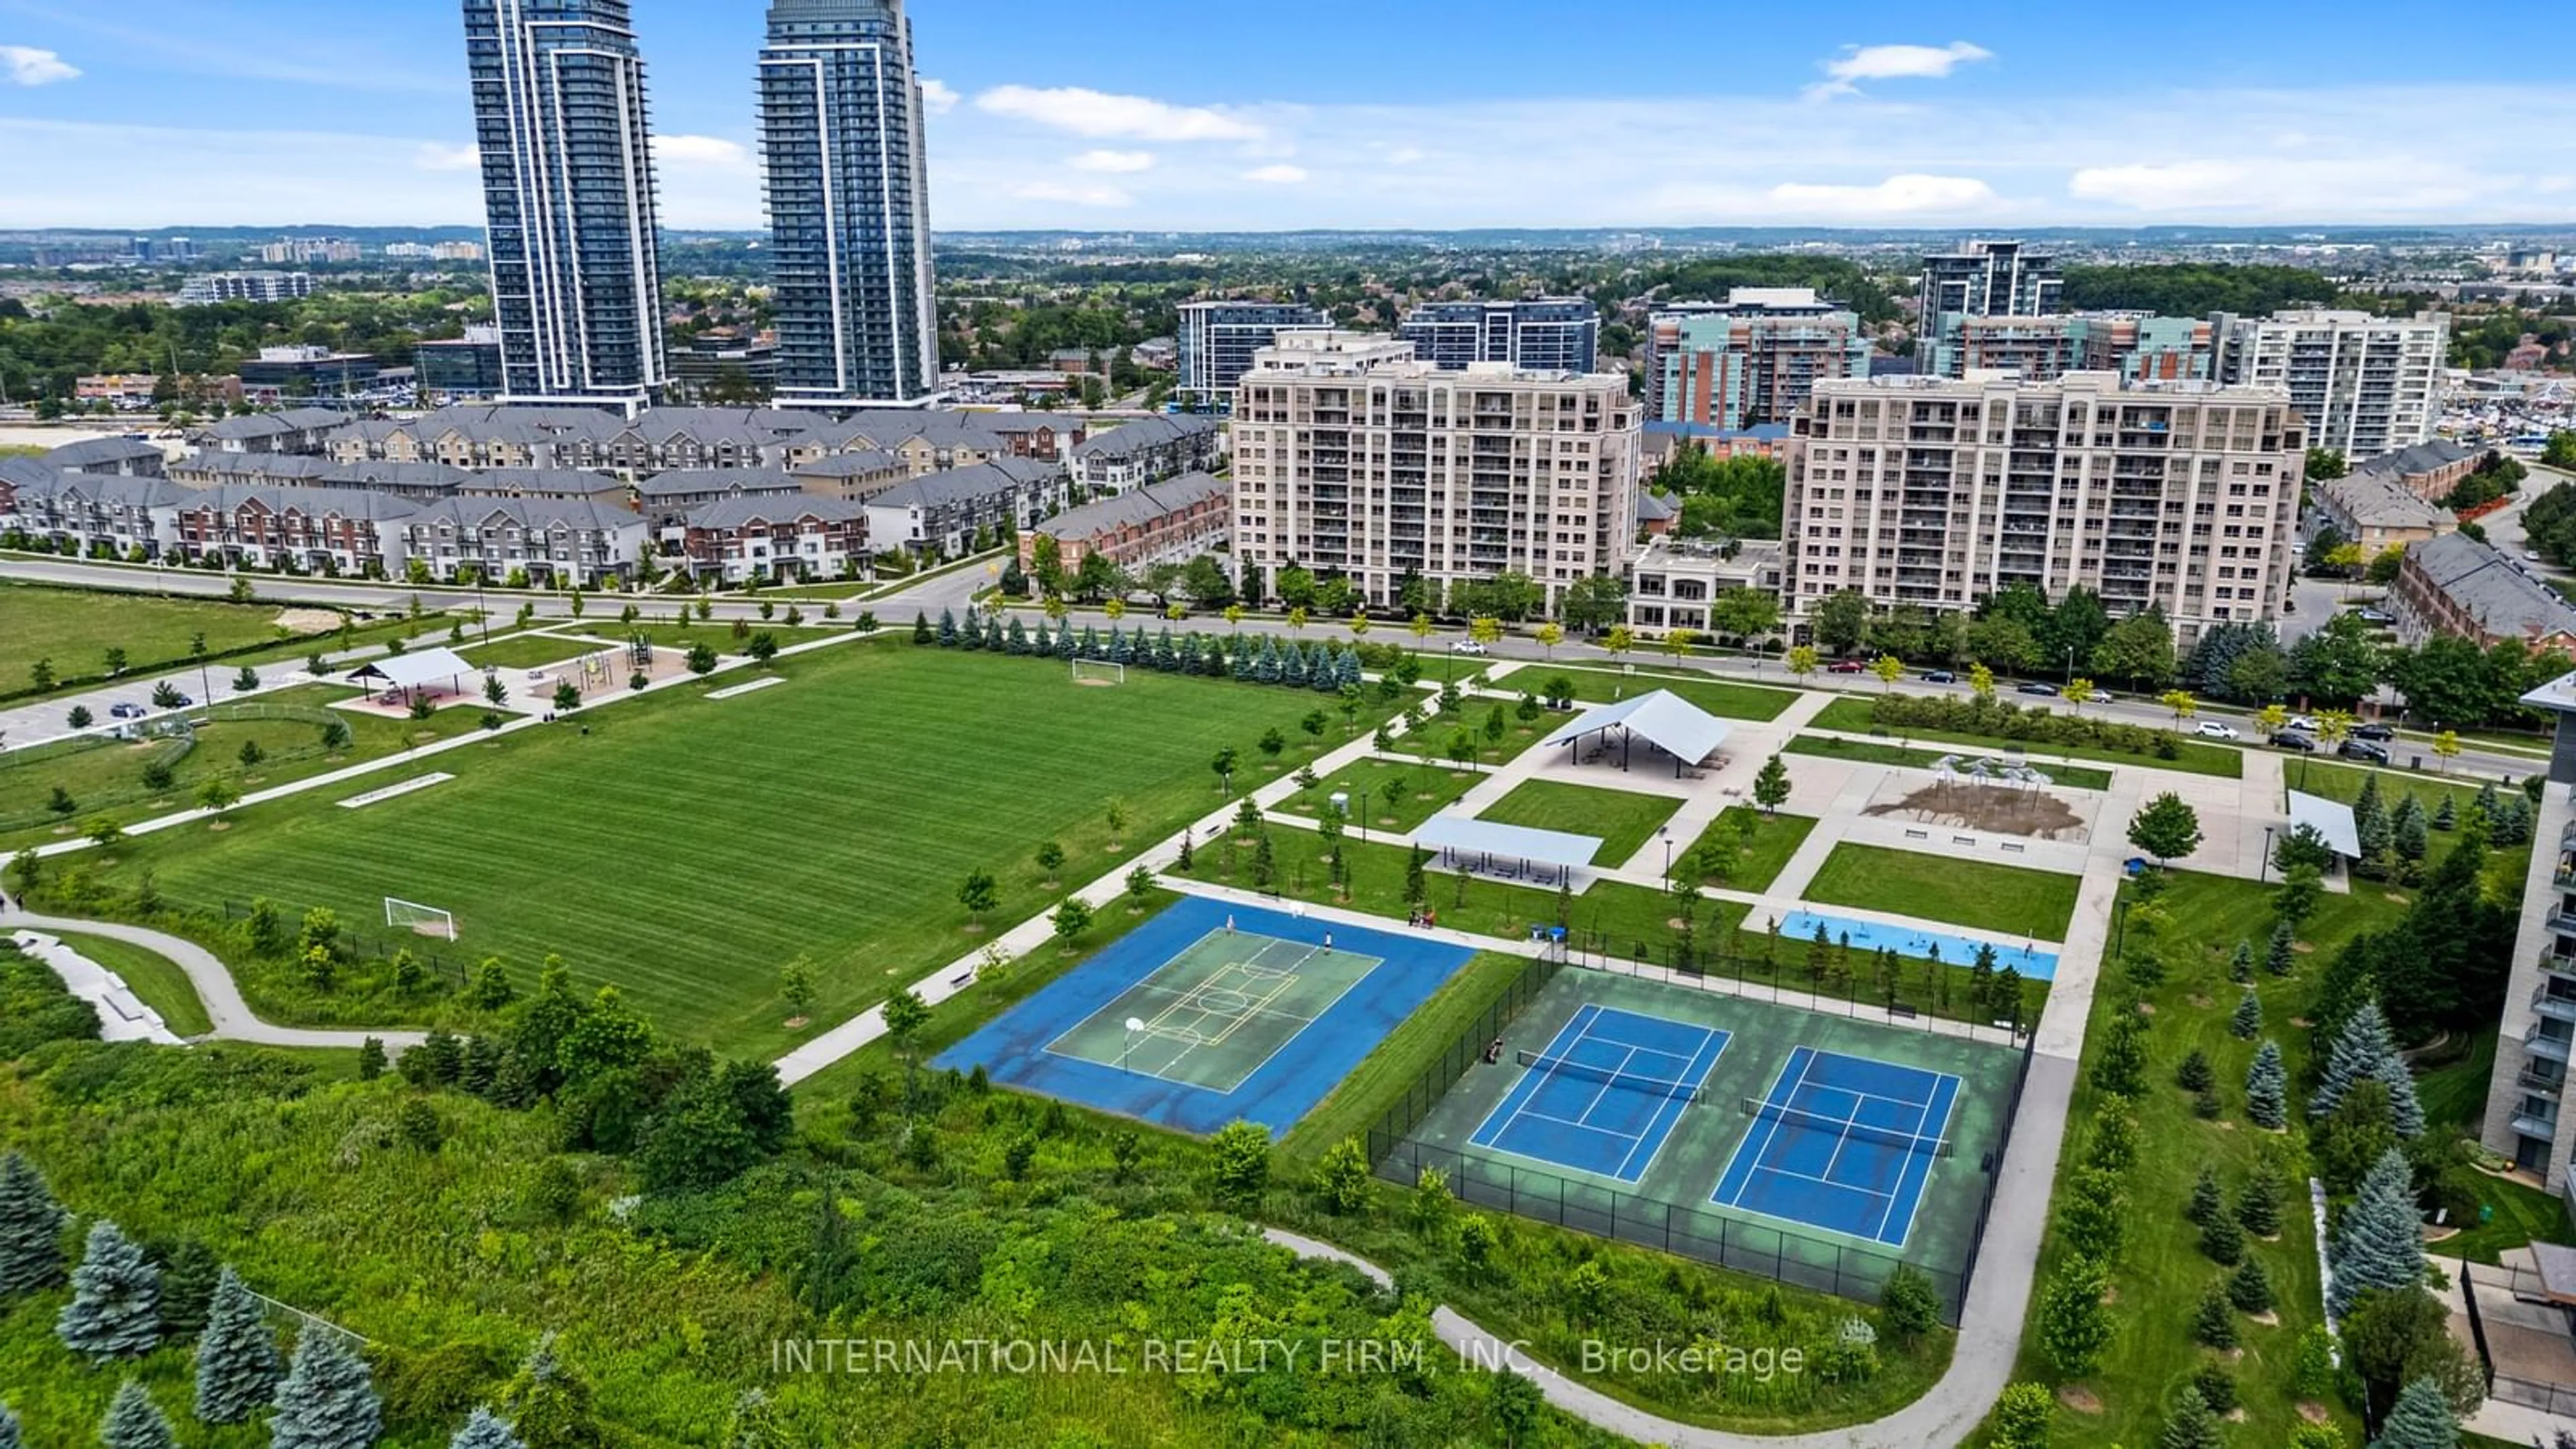 Lakeview for 39 Galleria Pkwy #205, Markham Ontario L3T 0A6